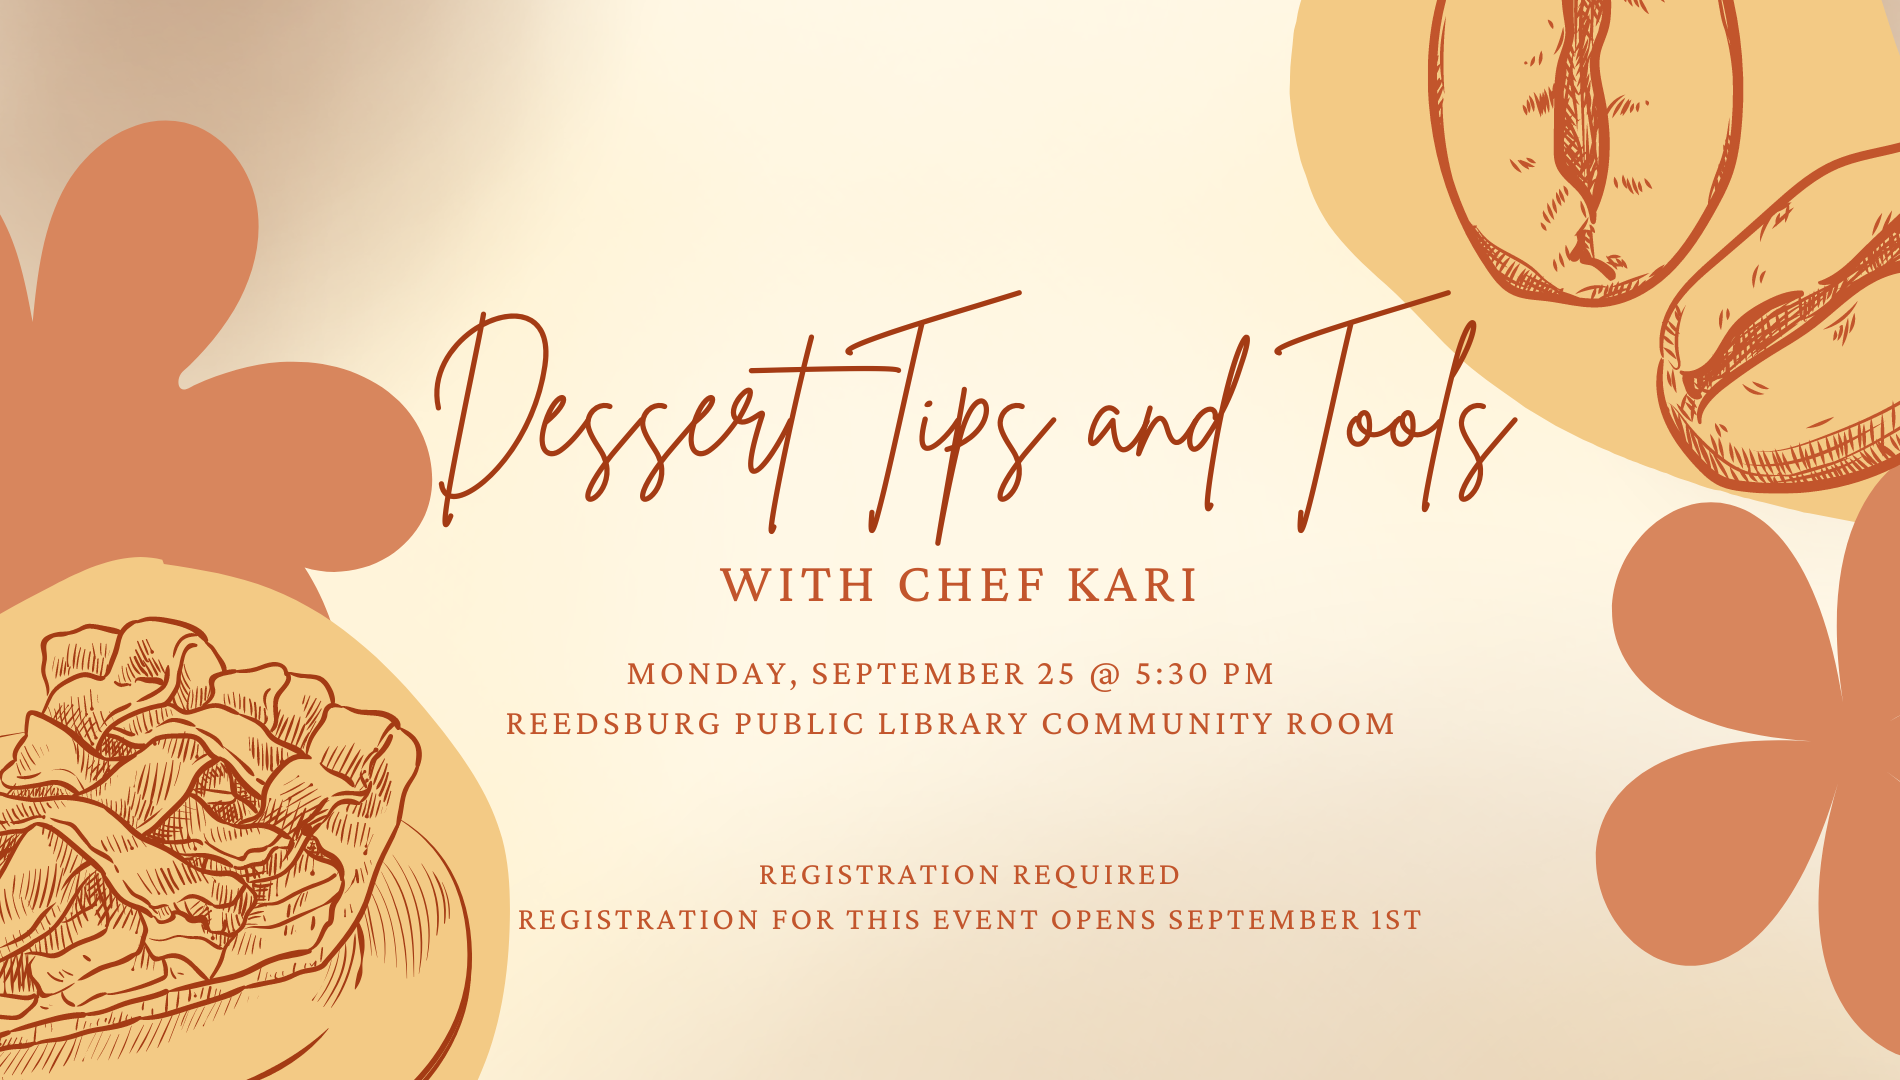 Dessert Tips and Tools With Chef Kari. Monday September 25th at 5:30 pm. Registration is required.